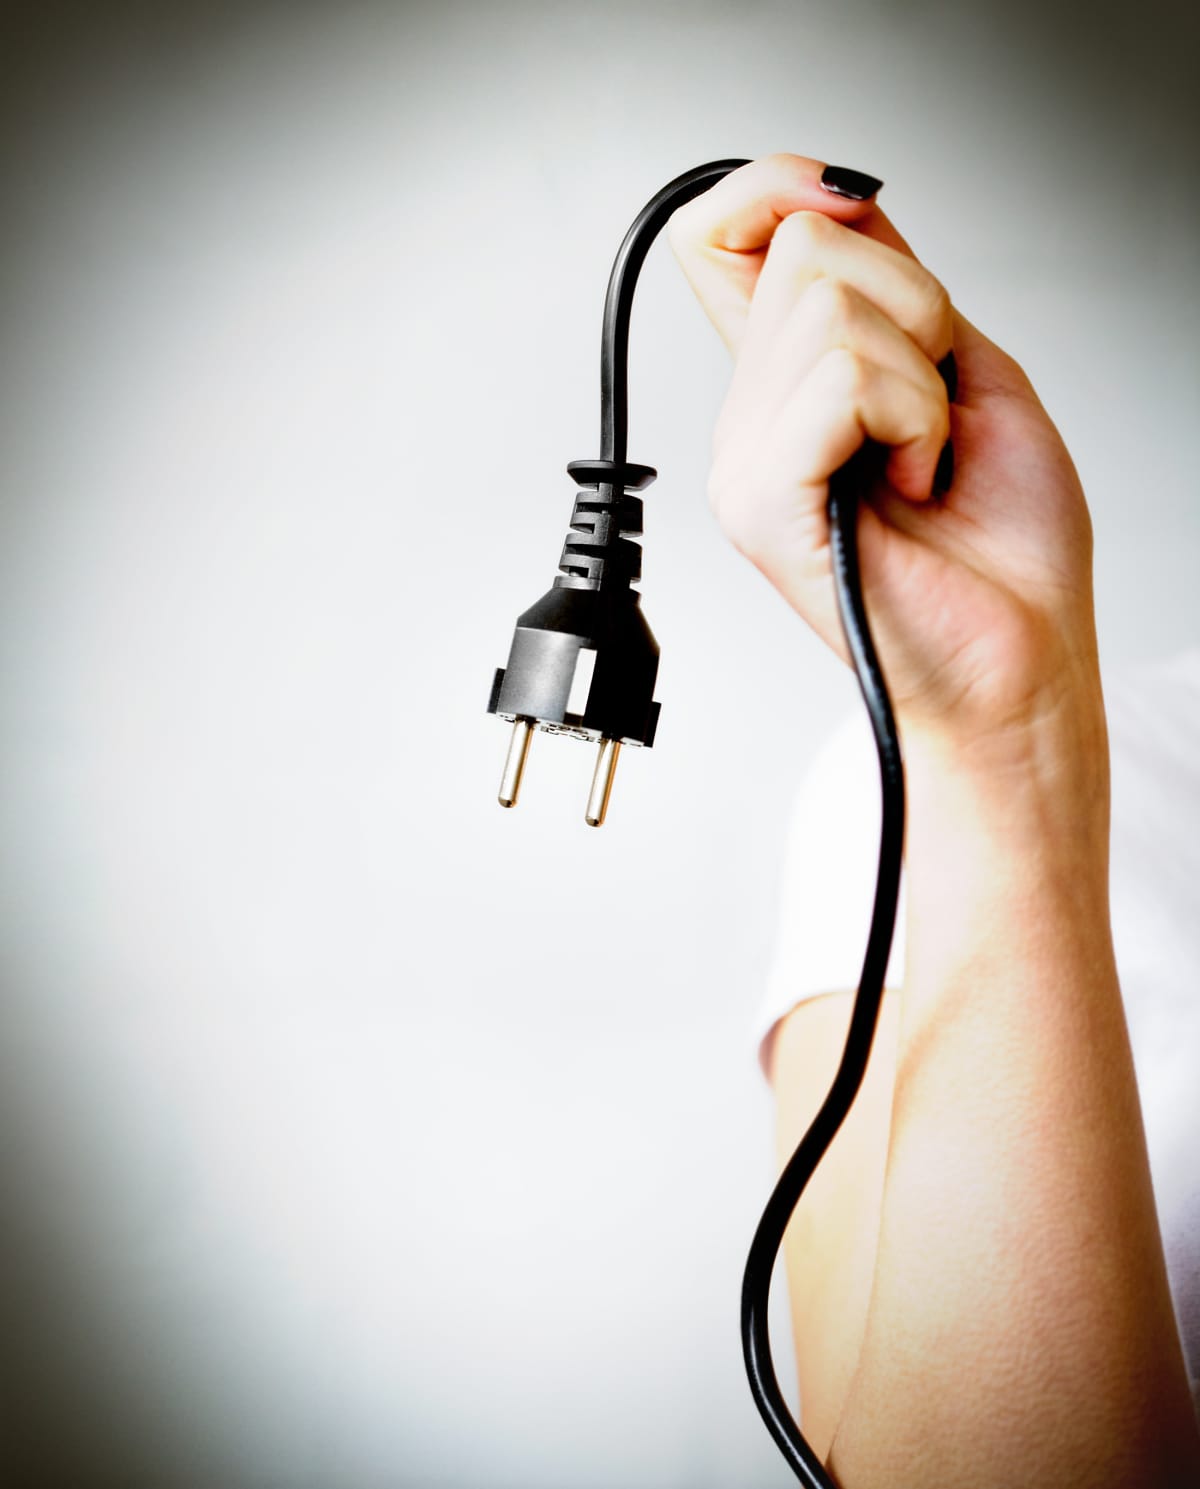 A person holding a TV cord